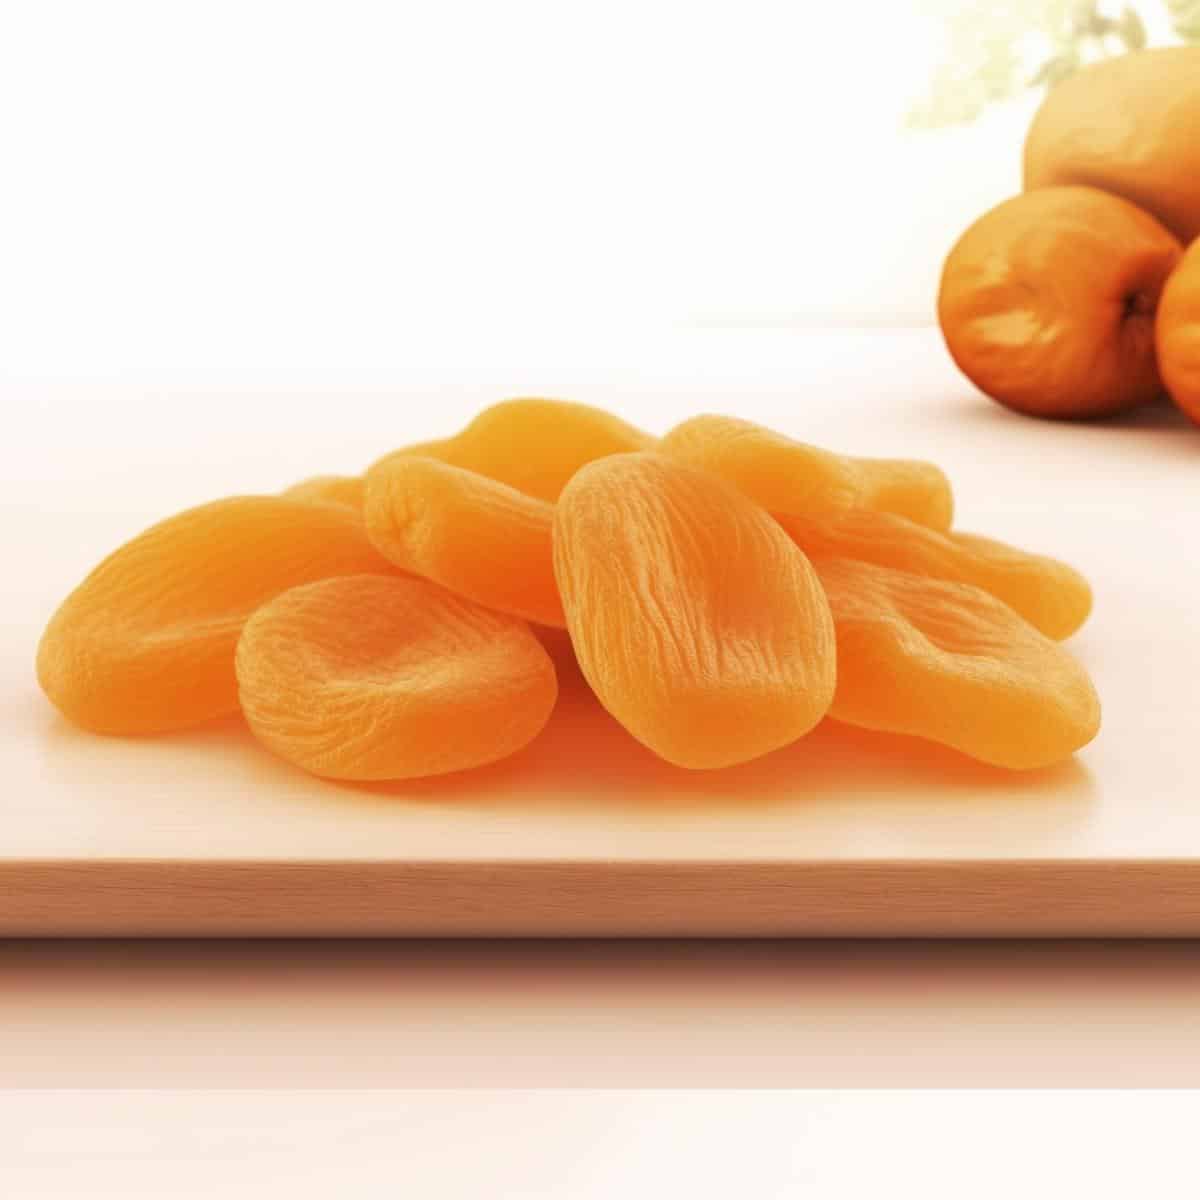 Dried Apricots on a kitchen counter